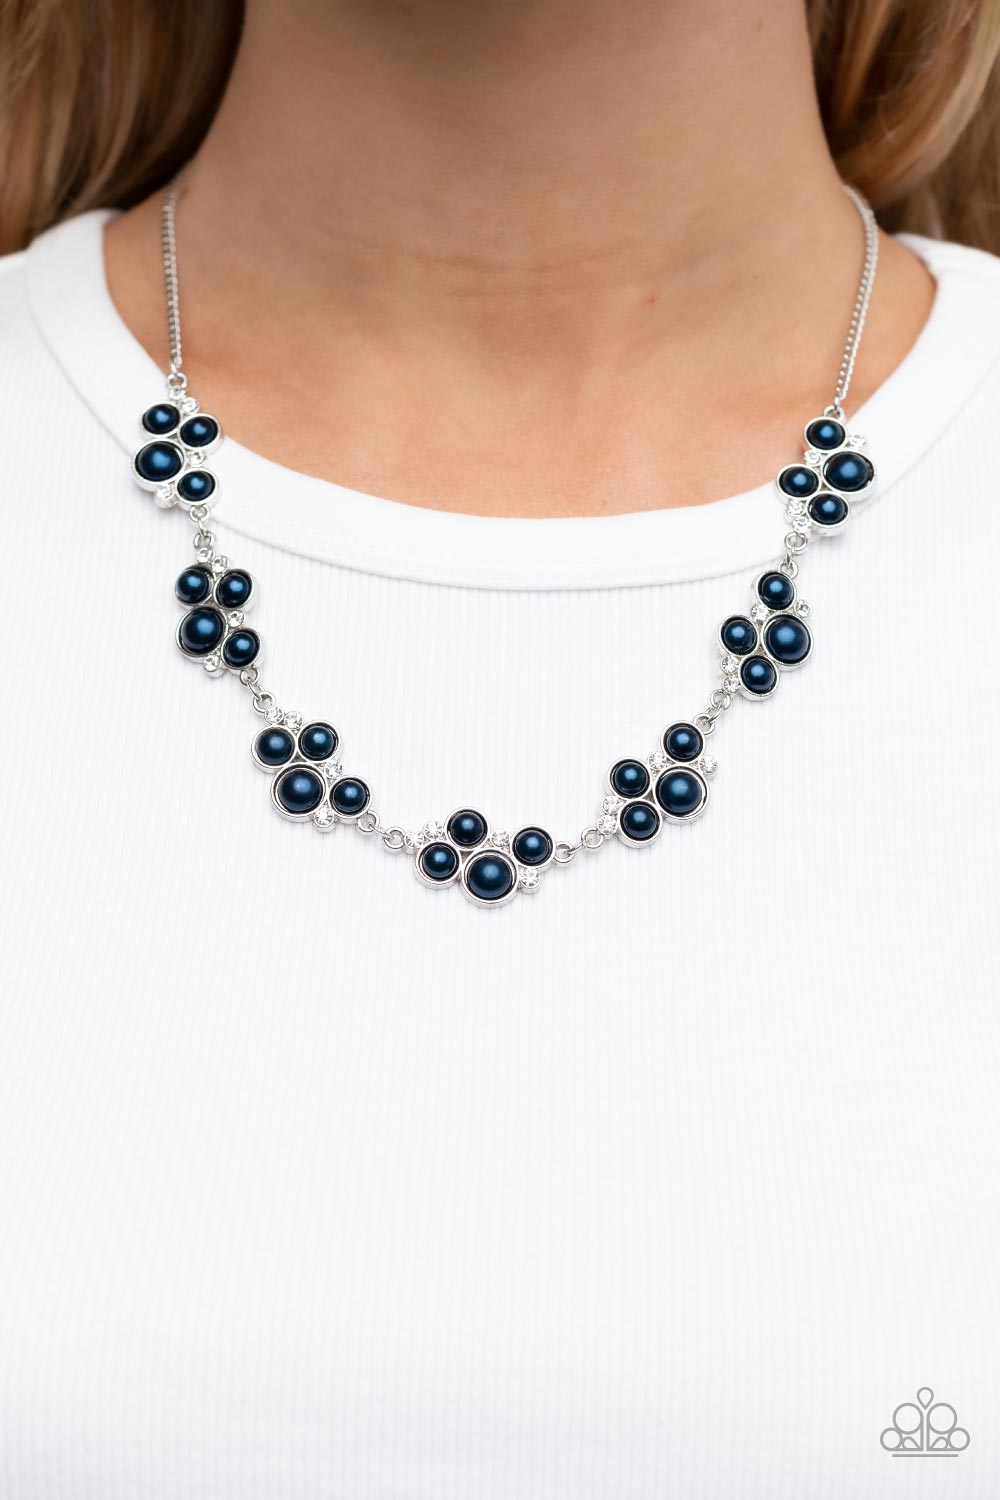 GRACE to the Top - Blue Necklace - Paparazzi Accessories